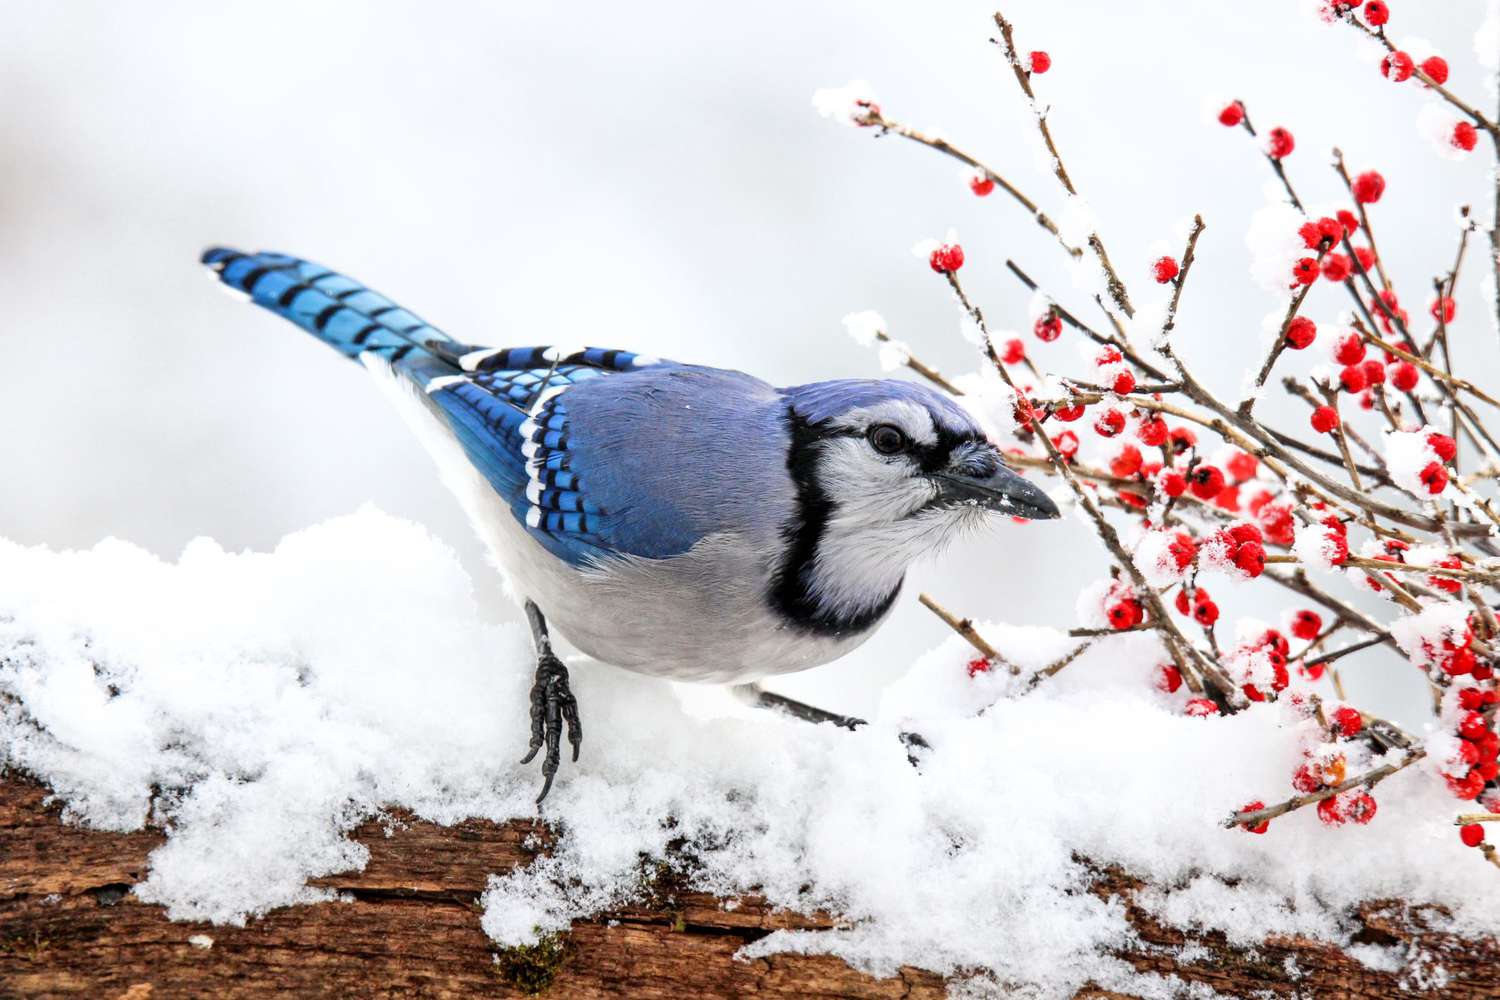 Attract More Birds to Your Garden This Winter by Following These Expert-Approved Tips